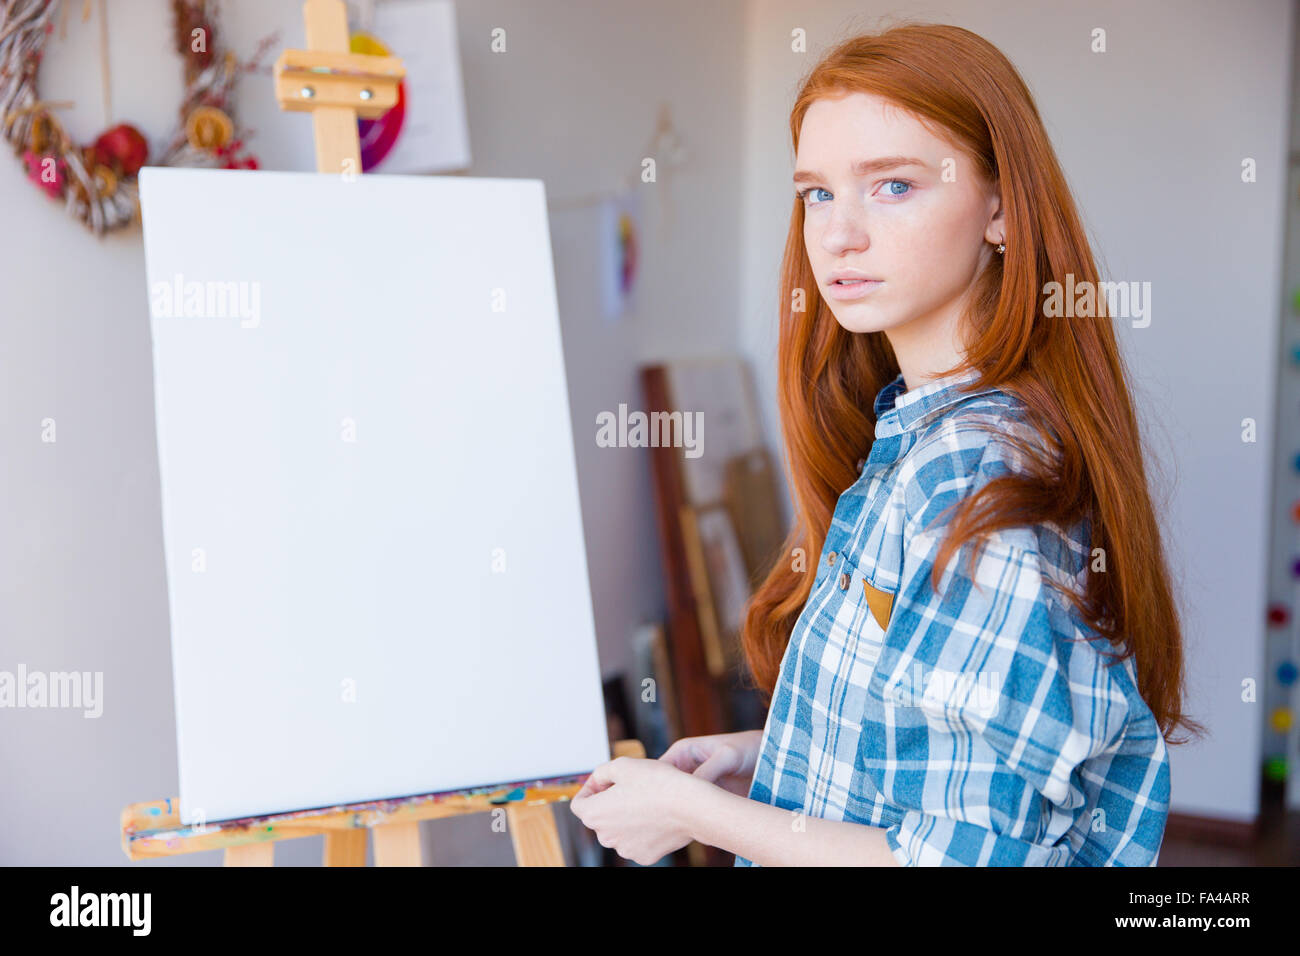 Portrait of beautiful pensive young woman painter in checkered shirt standing near blank easel in art classroom Stock Photo